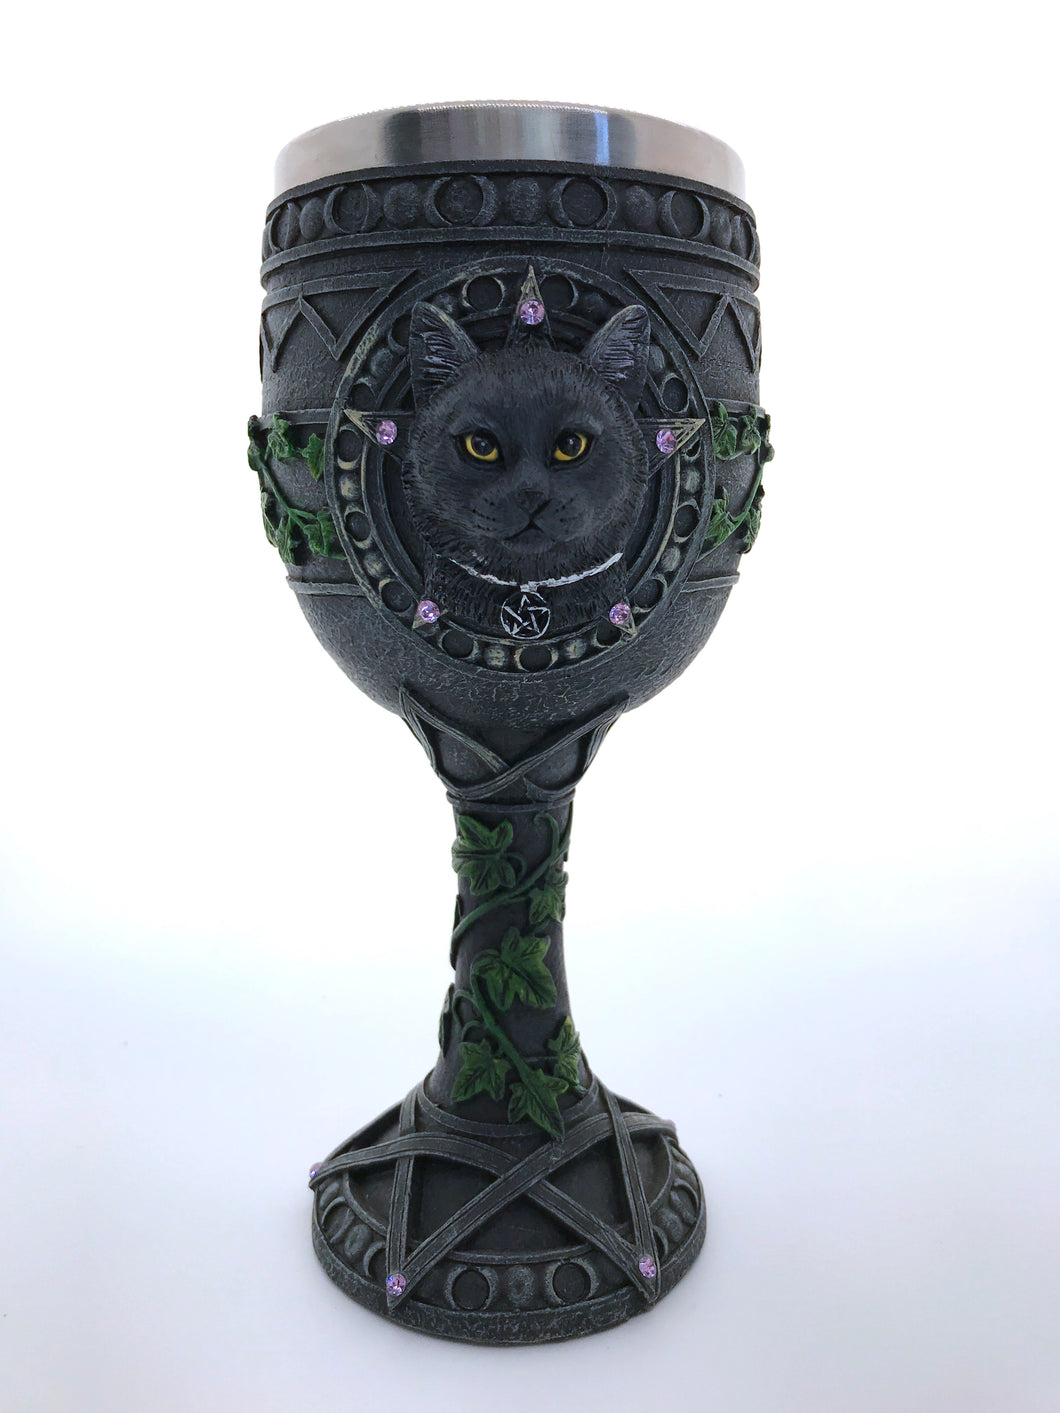 The Charmed One Goblet